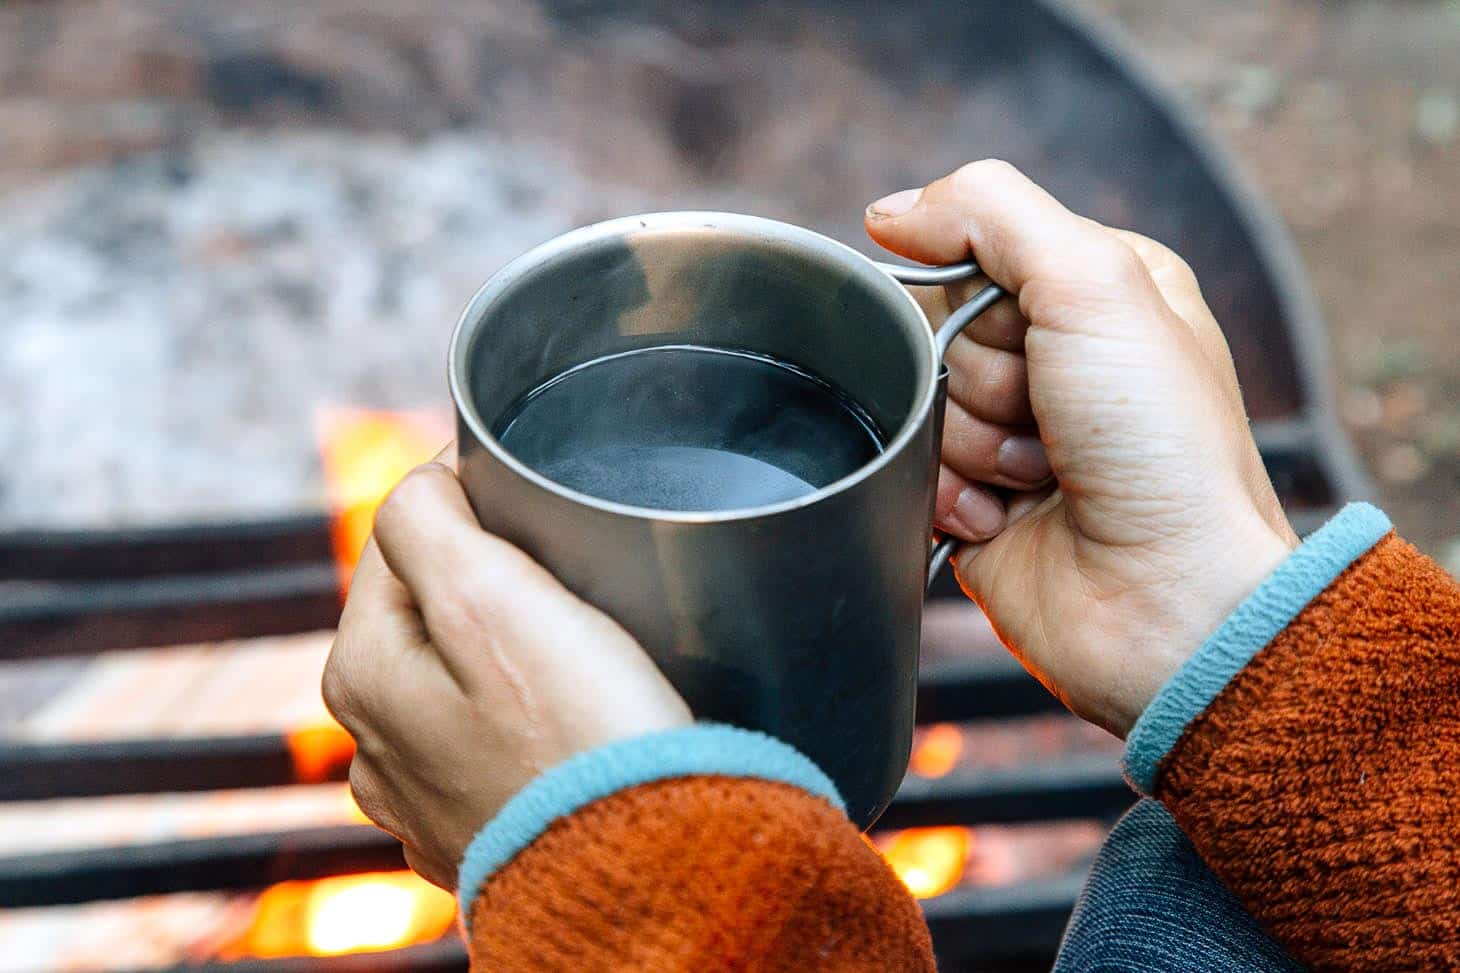 Megan holding a cup of coffee near a campfire